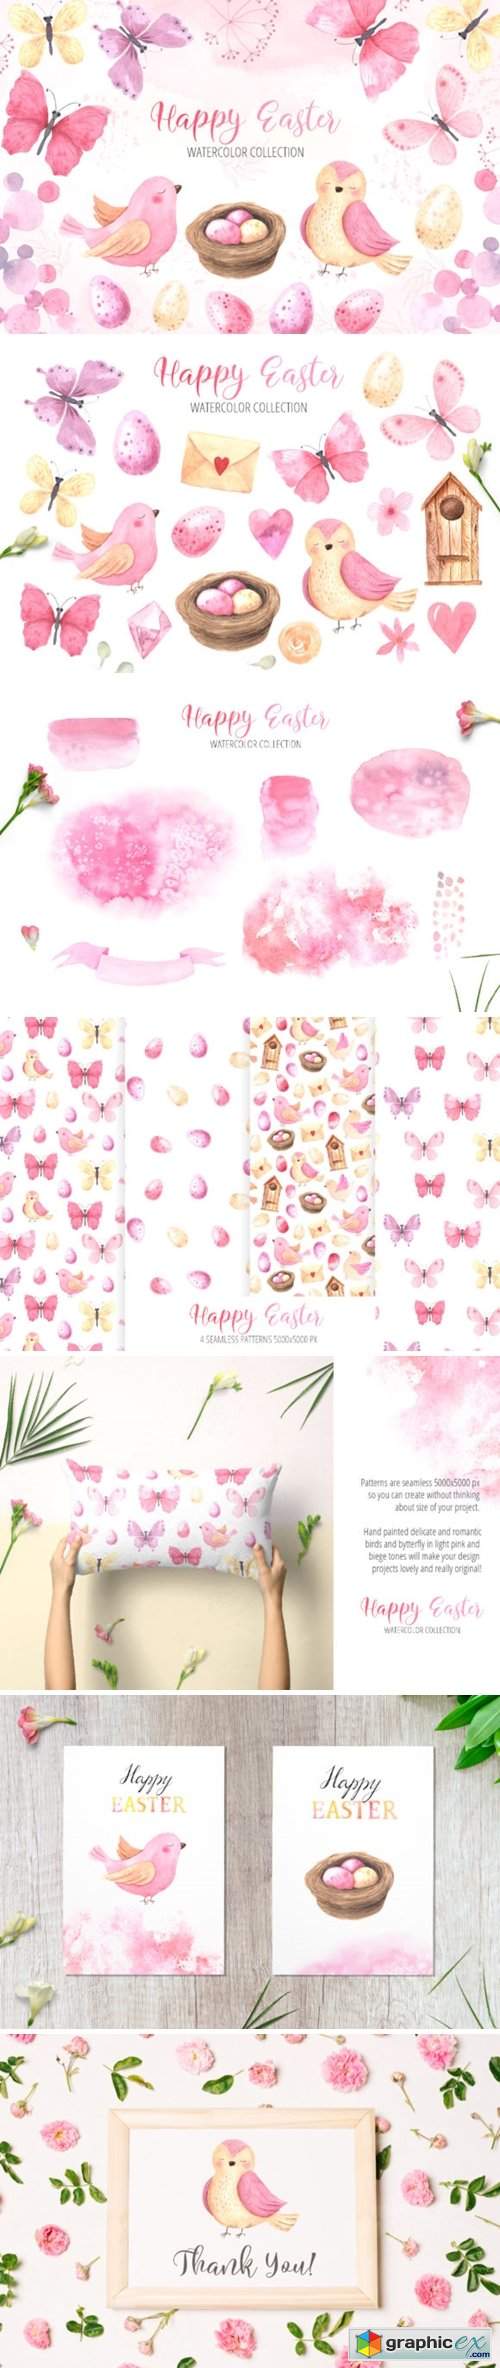  Watercolor Happy Easter Collection 